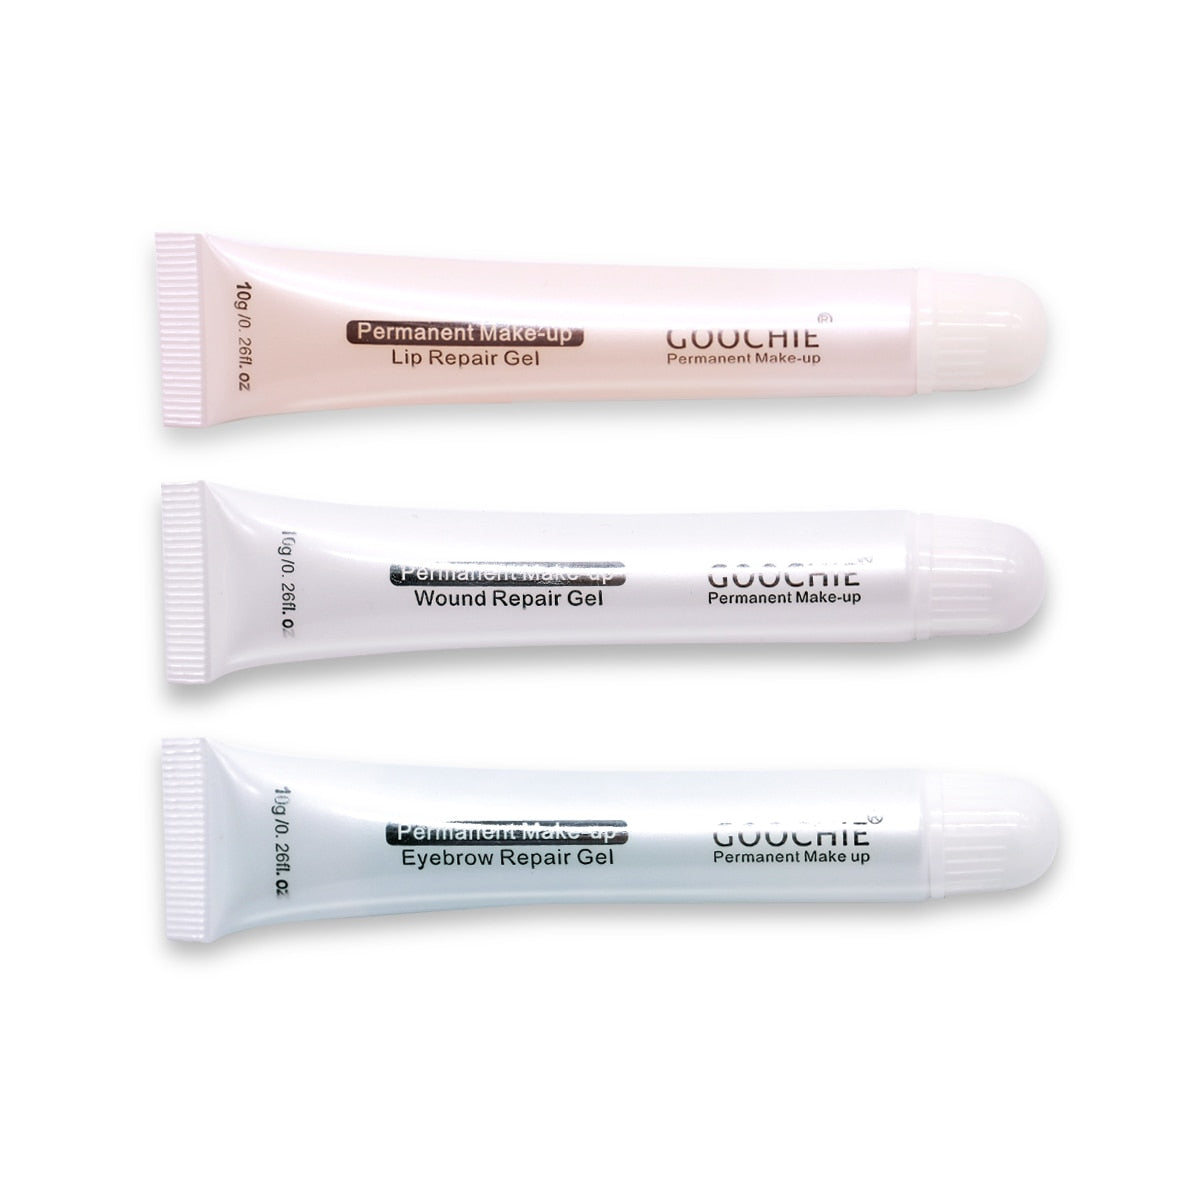 Permanent Makeup Aftercare Gel - Brows, Lips, and Wound Repair